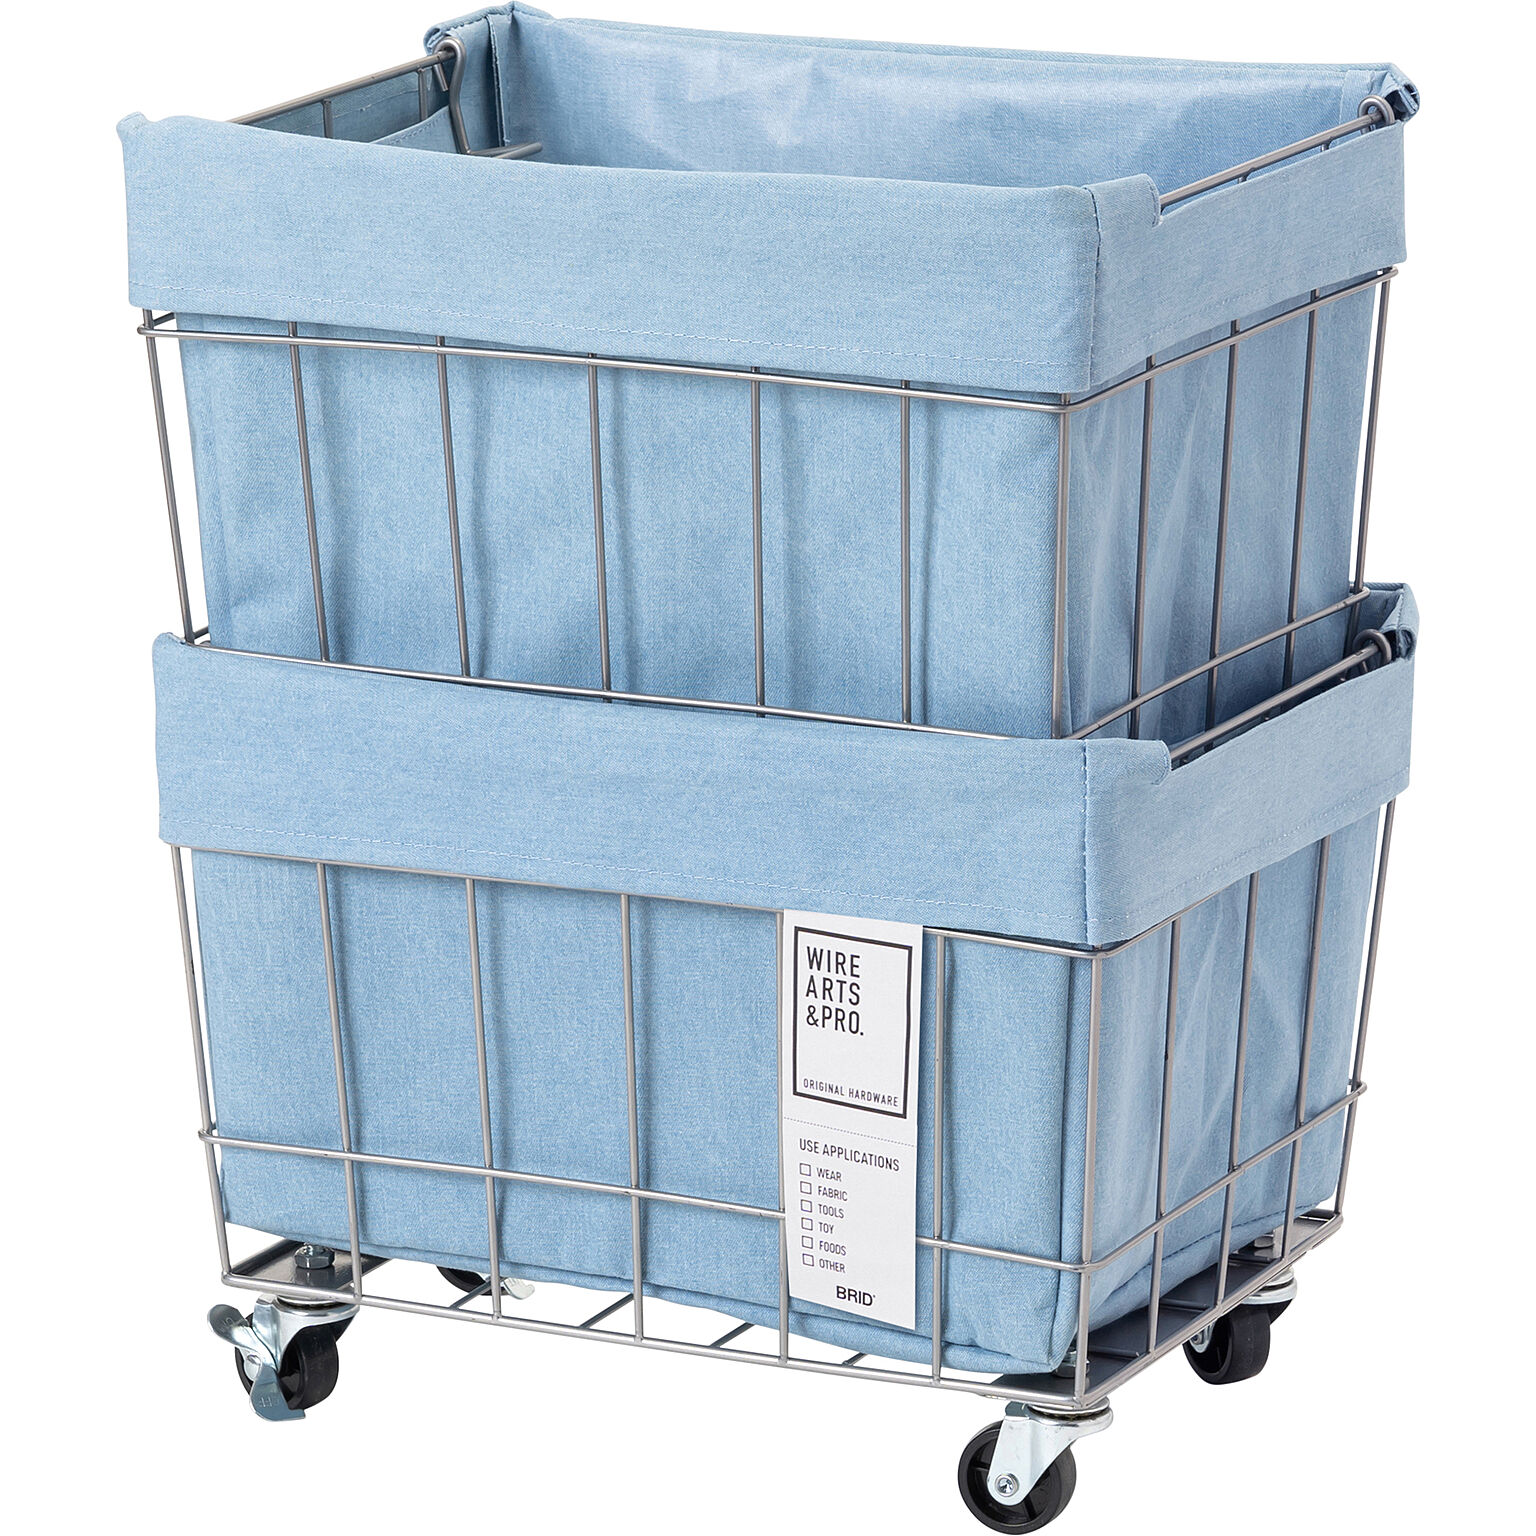 【BRID】DENIM STACKING BASKET 2 with CASTER / WASHABLE COVER デニム スタッキングバスケット２ ウォッシャブル